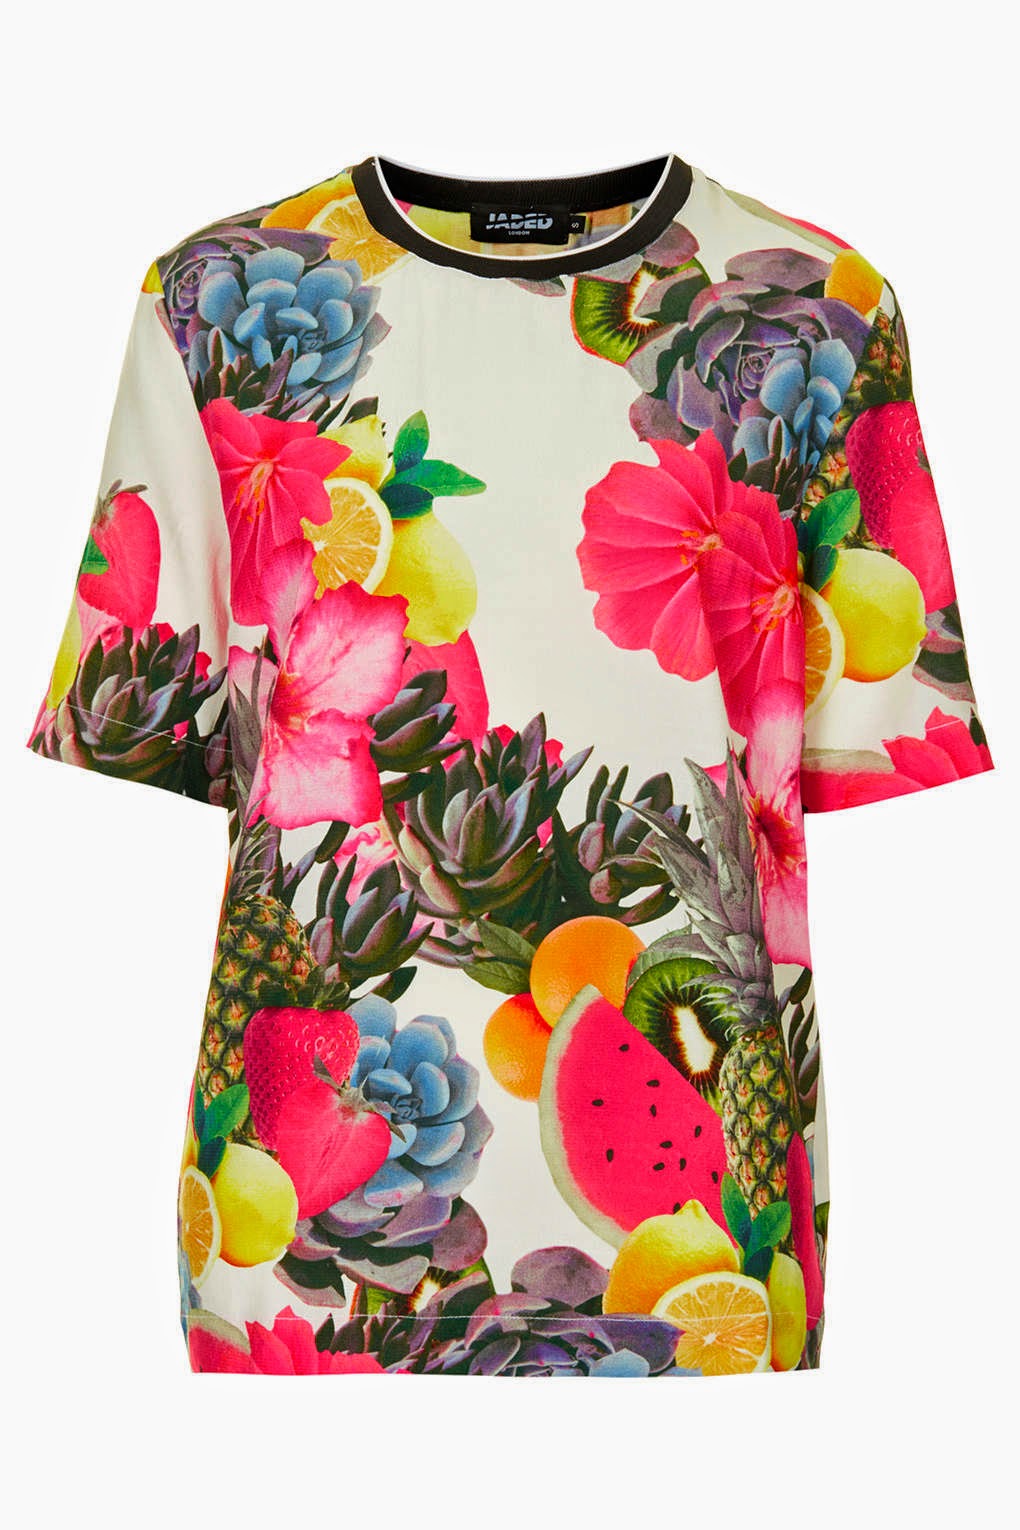 Fruit For The Office: Get Your Fashion 5 a Day with Fruity Prints